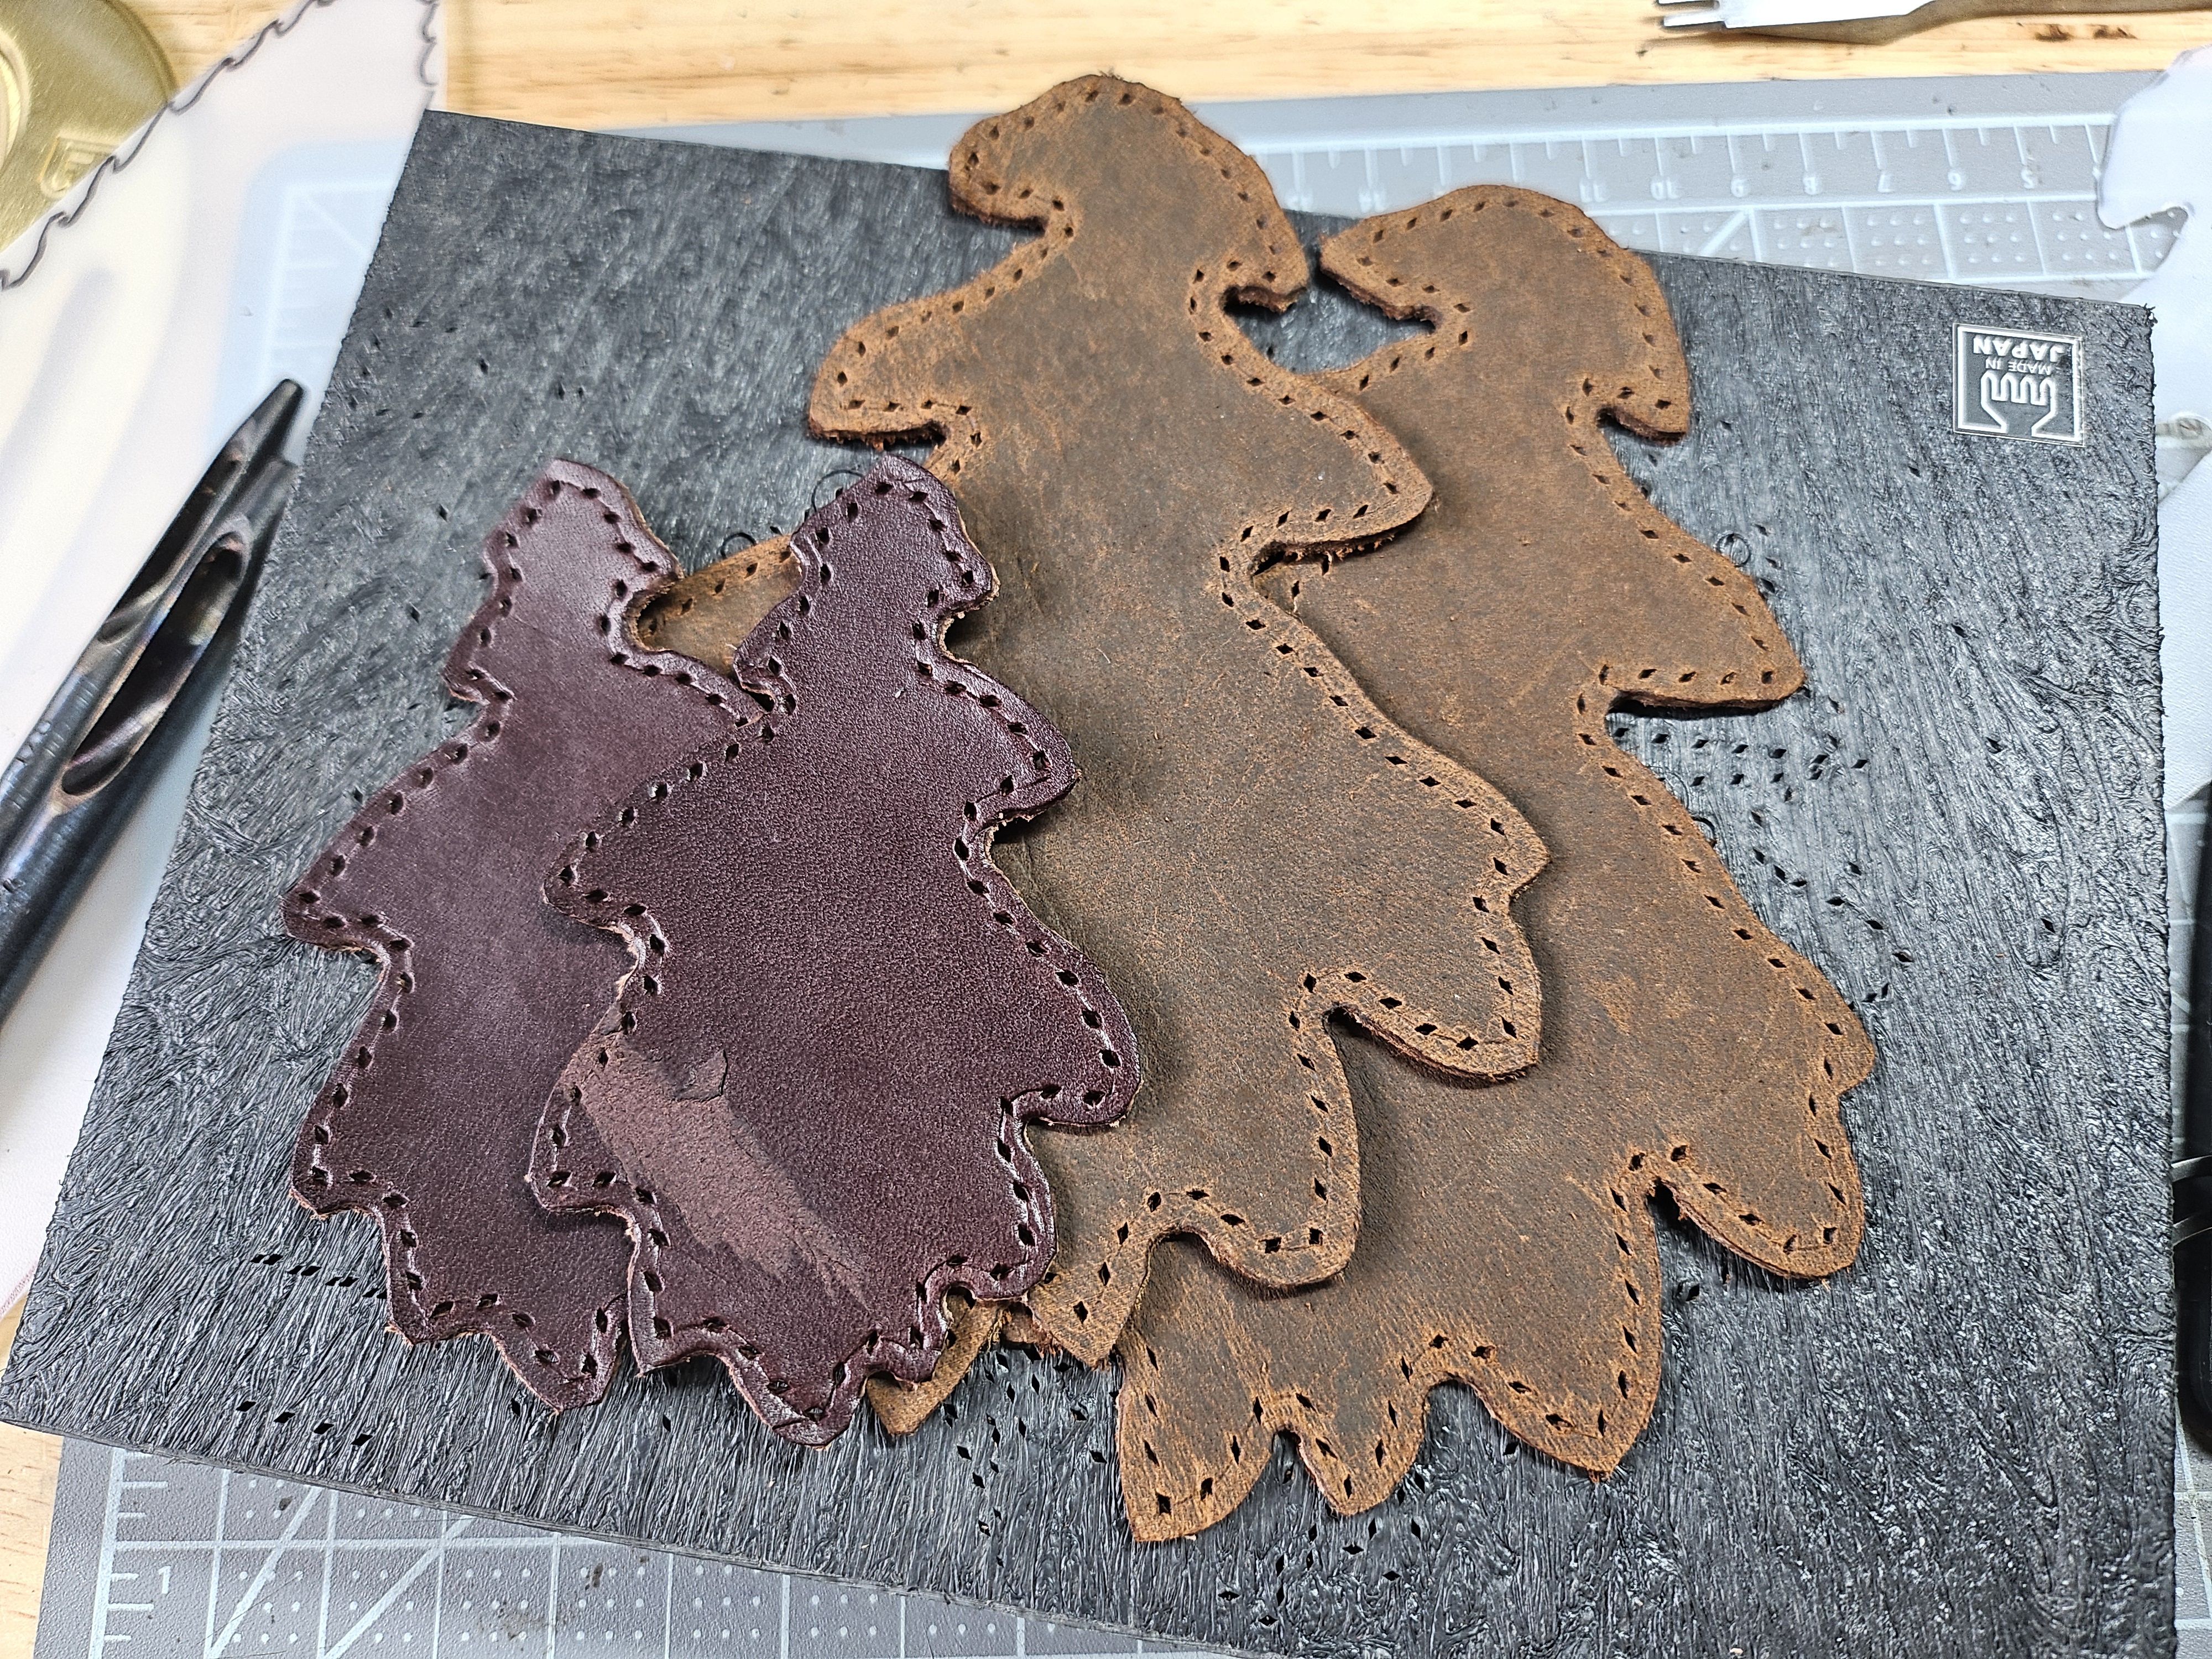 Several oak-leaf-shaped leather patches with stitching holes punched around the edges.